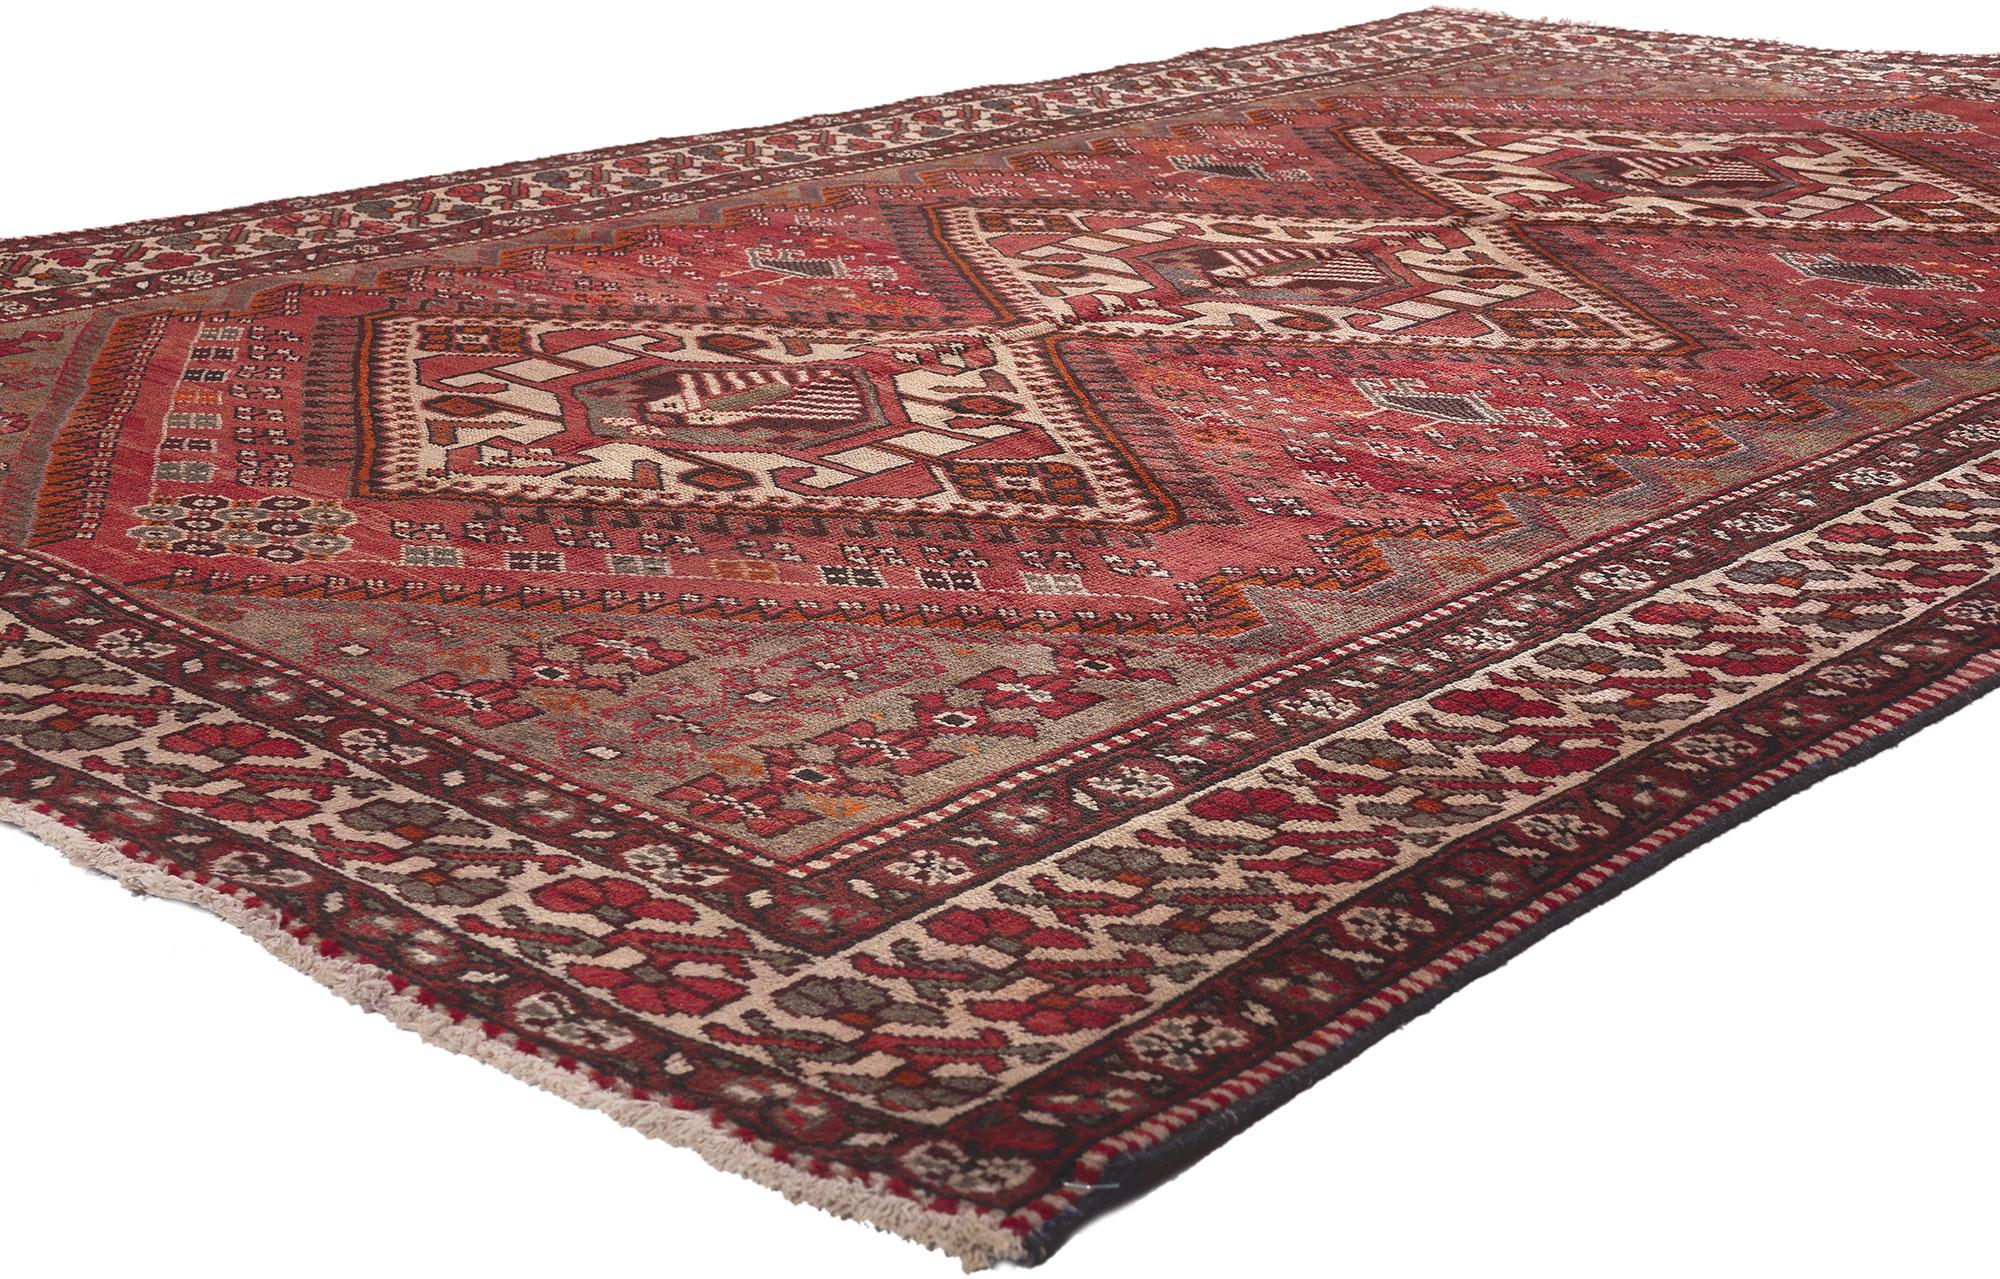 75879 Vintage Persian Hamadan Rug, 06'04 x 09'10.
Nomadic charm meets decidedly dramatic in this vintage Persian Hamadan rug. The intrinsic tribal design and bold earthy hues woven into this piece work together creating a warm and inviting yet